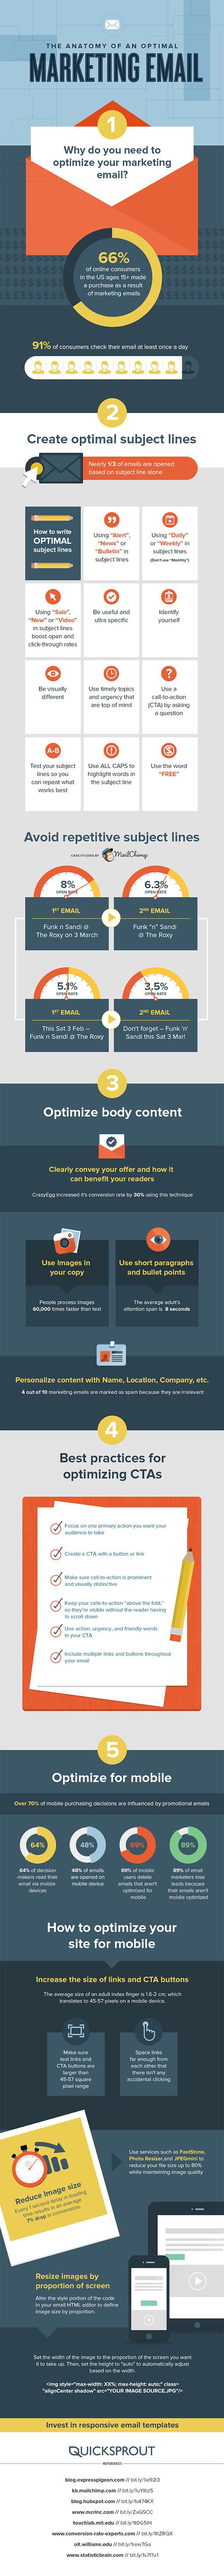 25-awesome-tips-to-create-marketing-emails